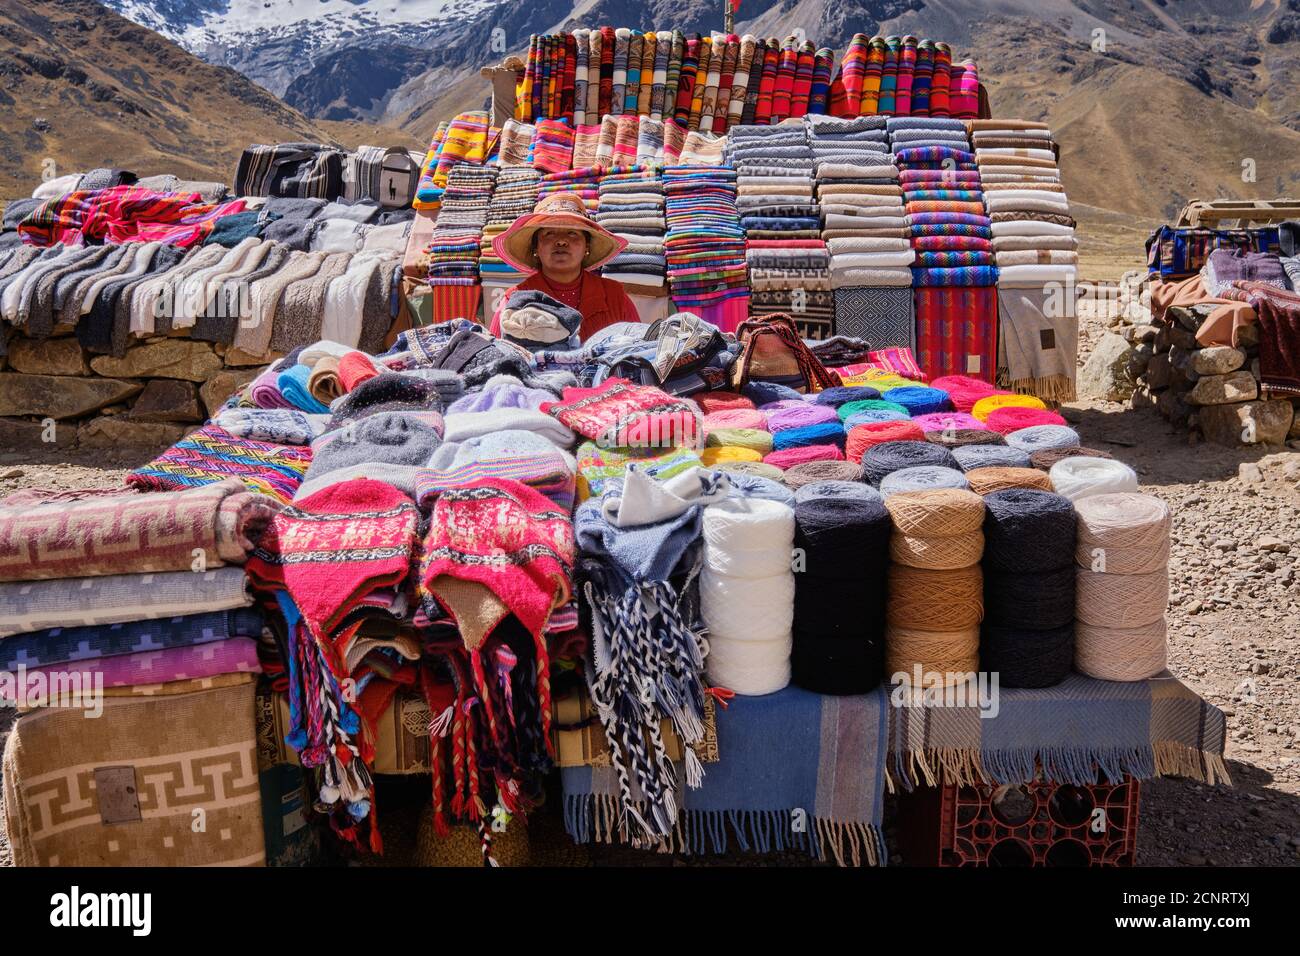 A roadside market in the Altiplano high Andes, Peru, selling textiles and fabrics, clothes and tourist souvenirs Stock Photo